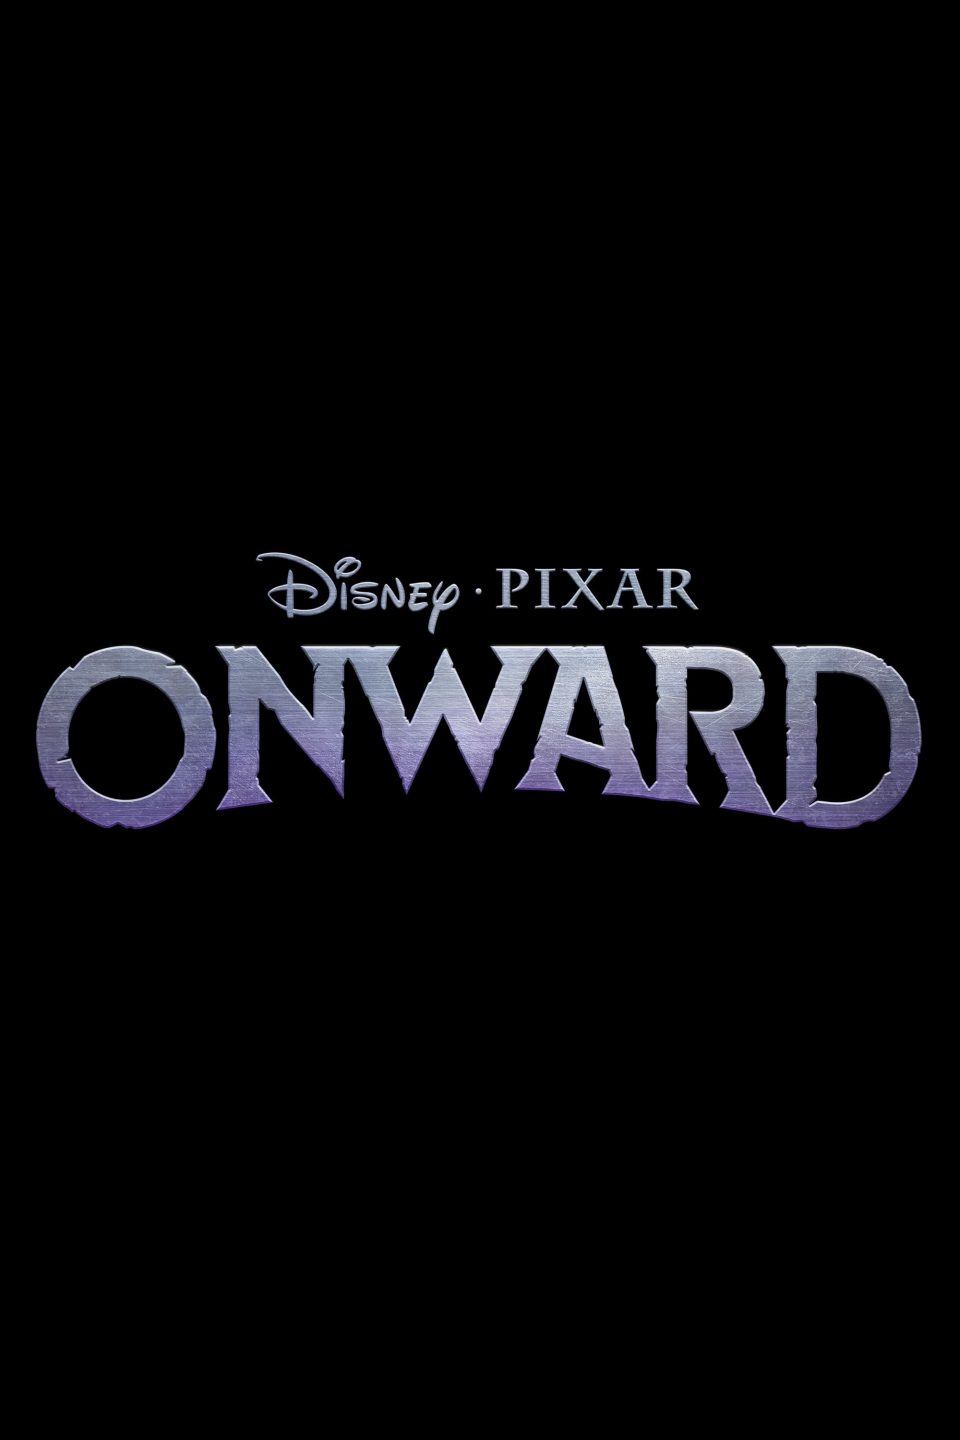 Poster for the movie "Onward"